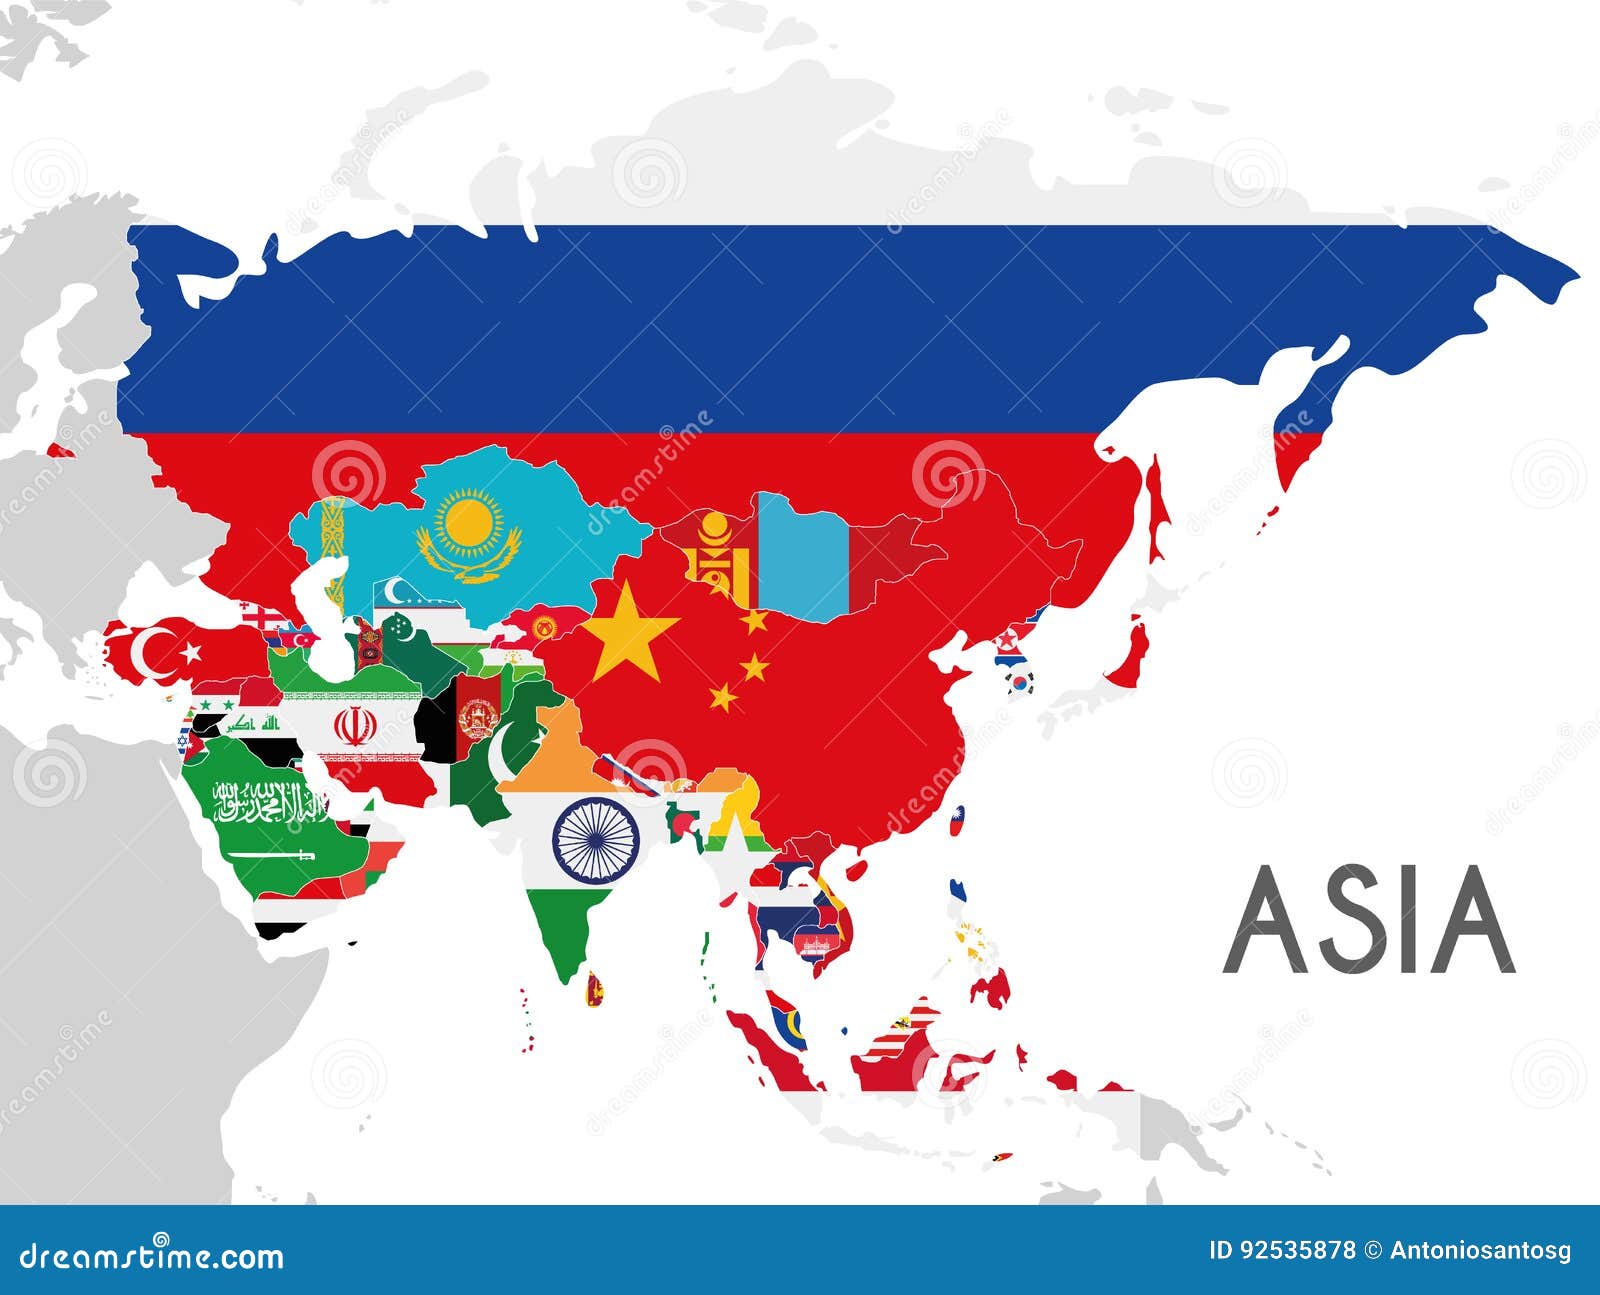 Political Asia Map Vector Illustration With The Flags Of All Asian